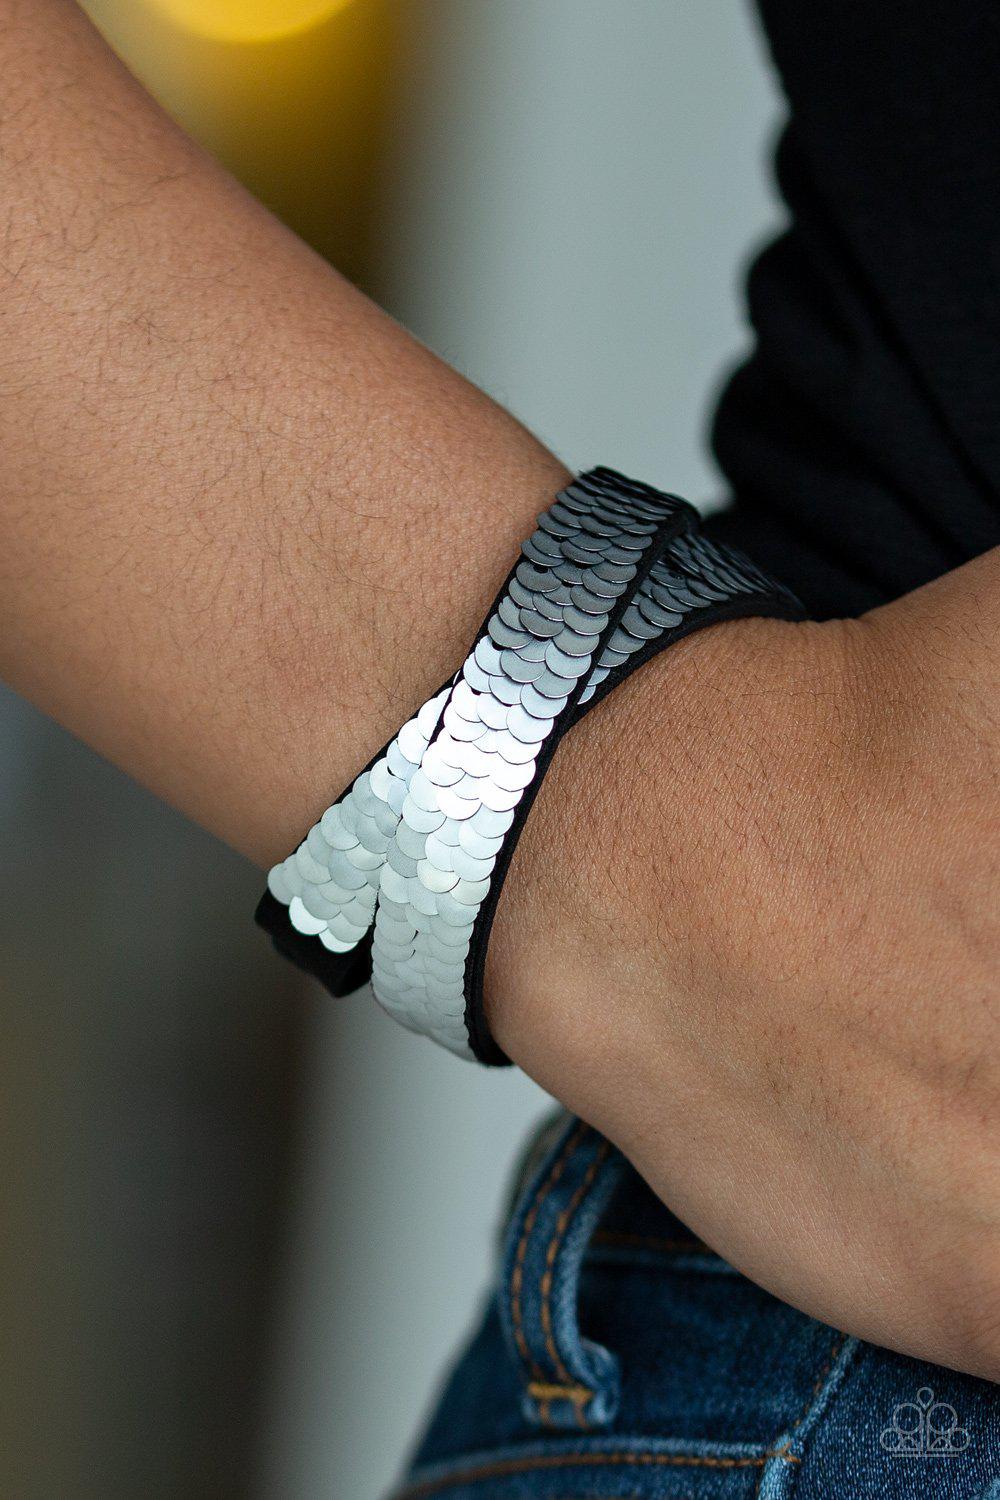 Under The SEQUINS Silver / Black Double-Wrap Snap Bracelet - Paparazzi Accessories-CarasShop.com - $5 Jewelry by Cara Jewels